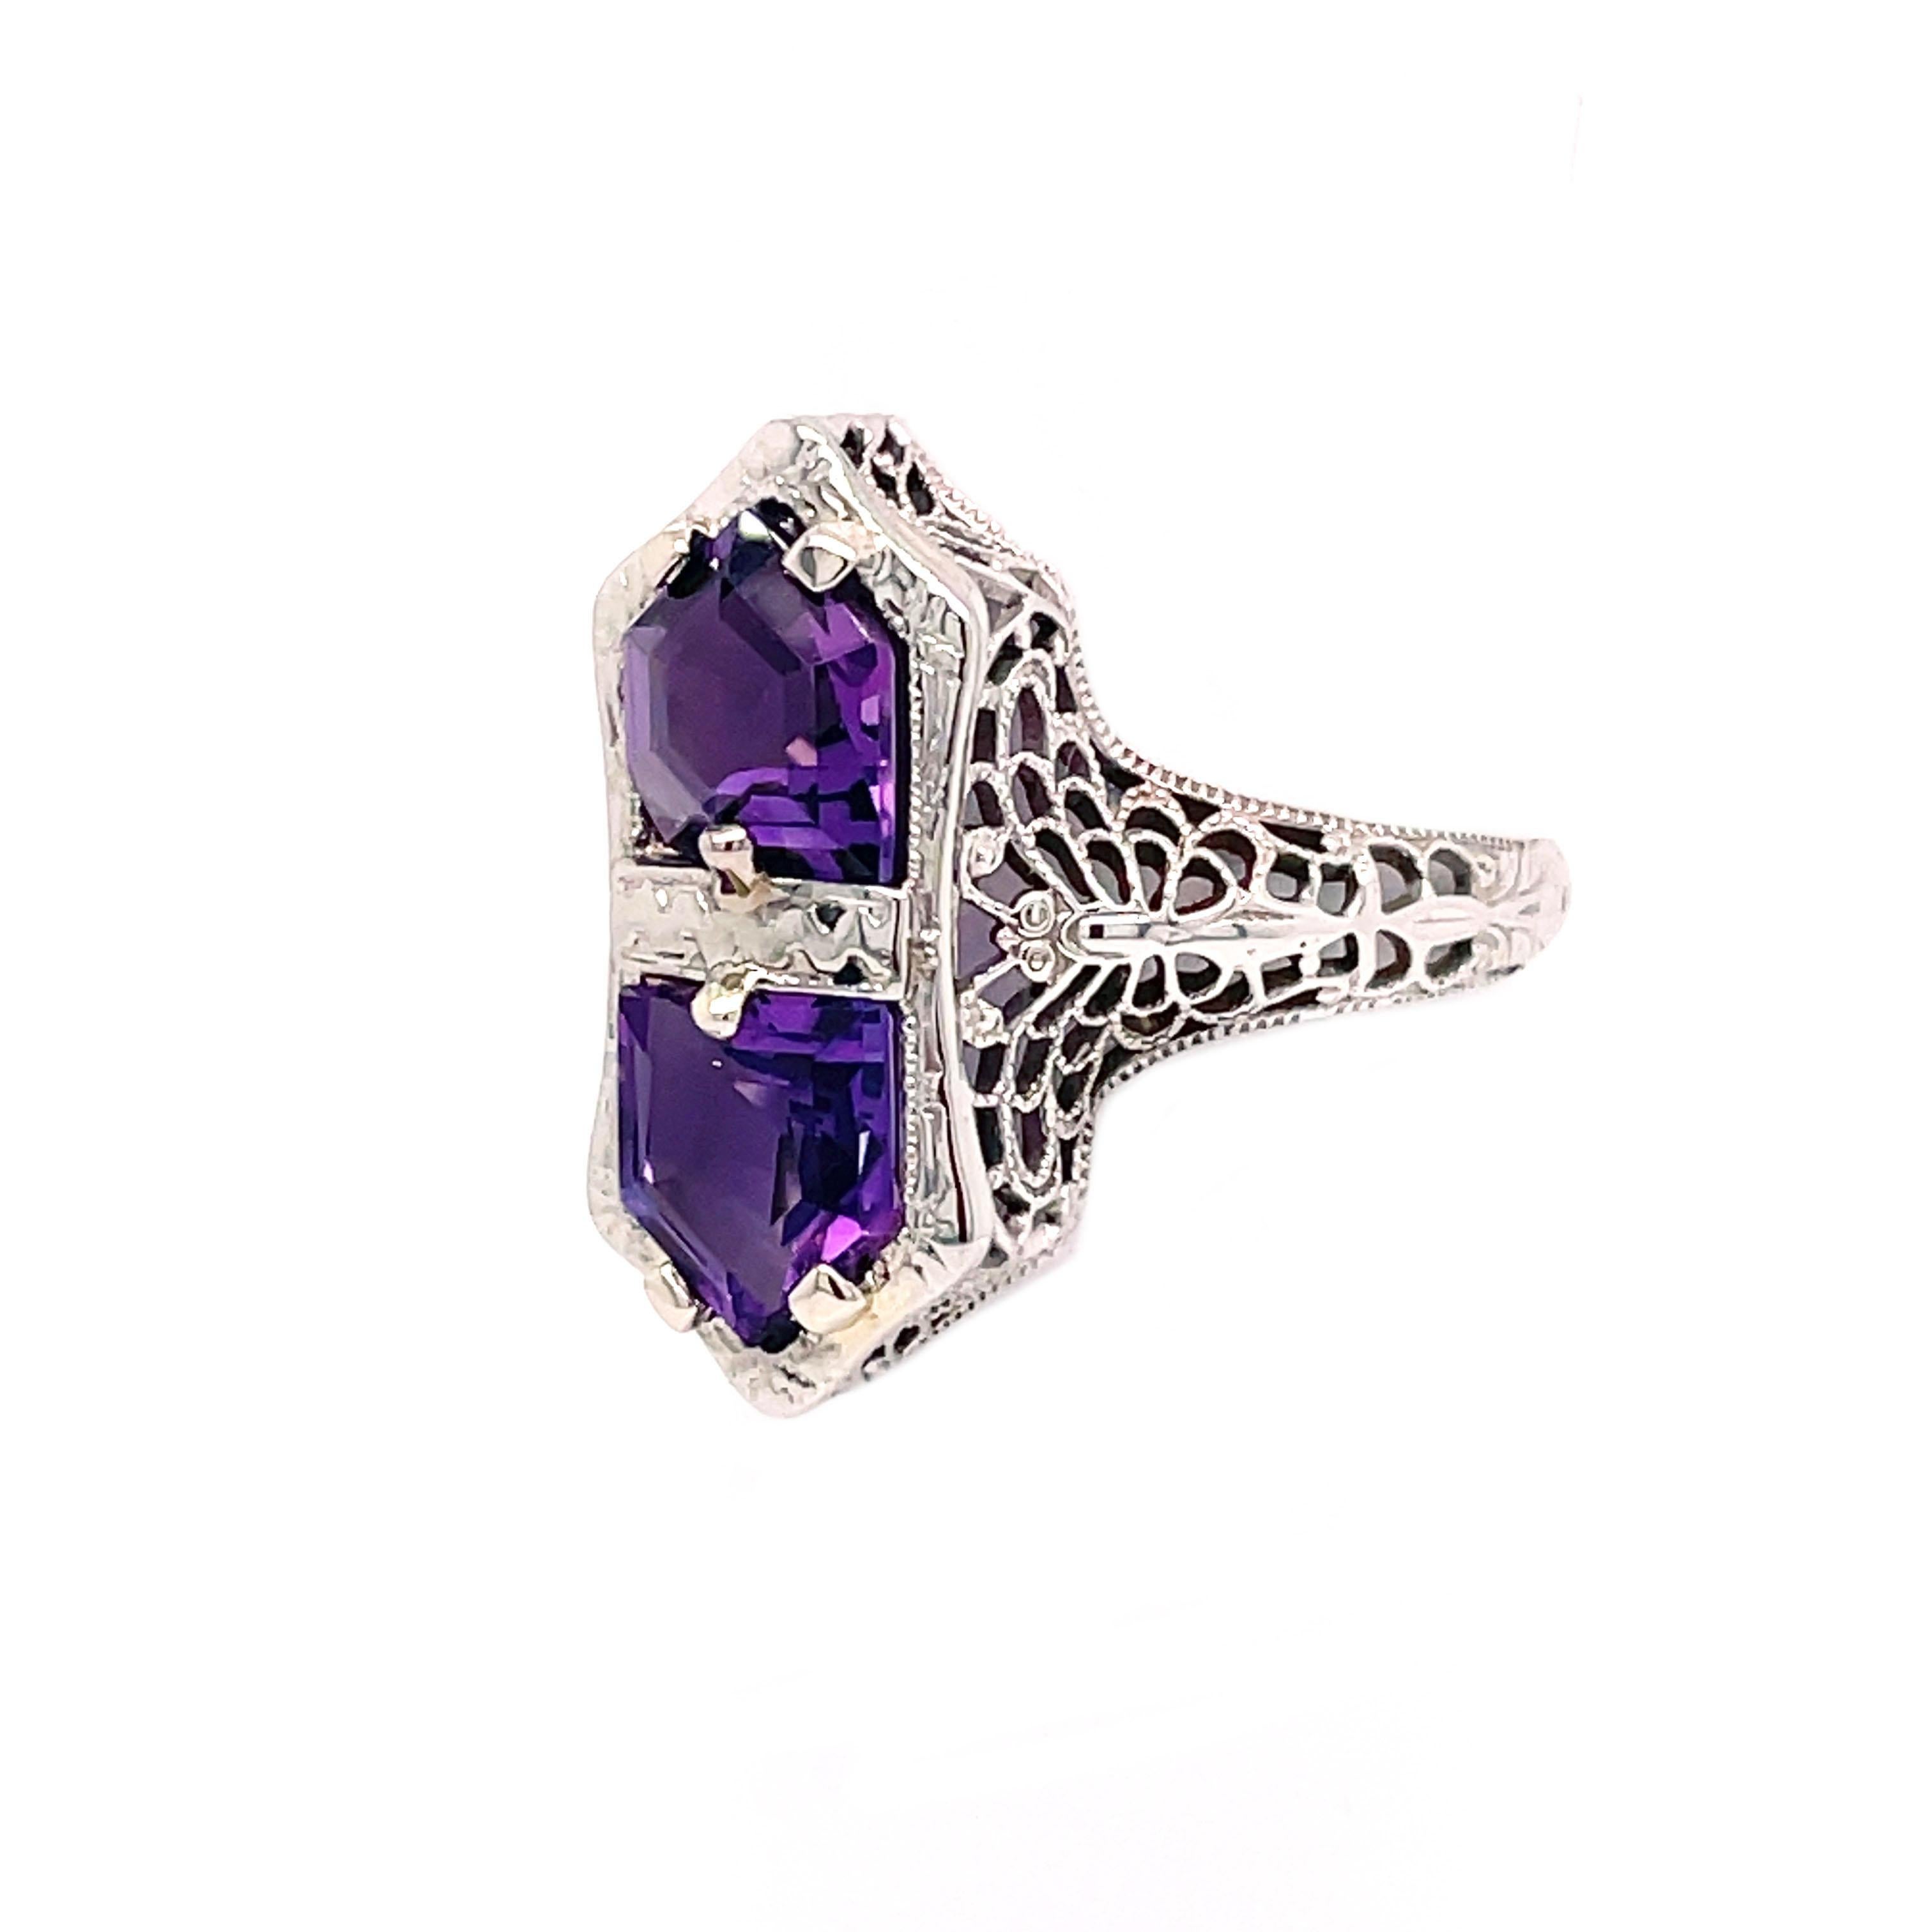 This charming 1920s filigree ring is set in 14K white gold with two beautiful rich purple amethyst! This whimsical ring is in pristine condition and features a lovely butterfly motif along the shoulders of the ring. The design of this ring is